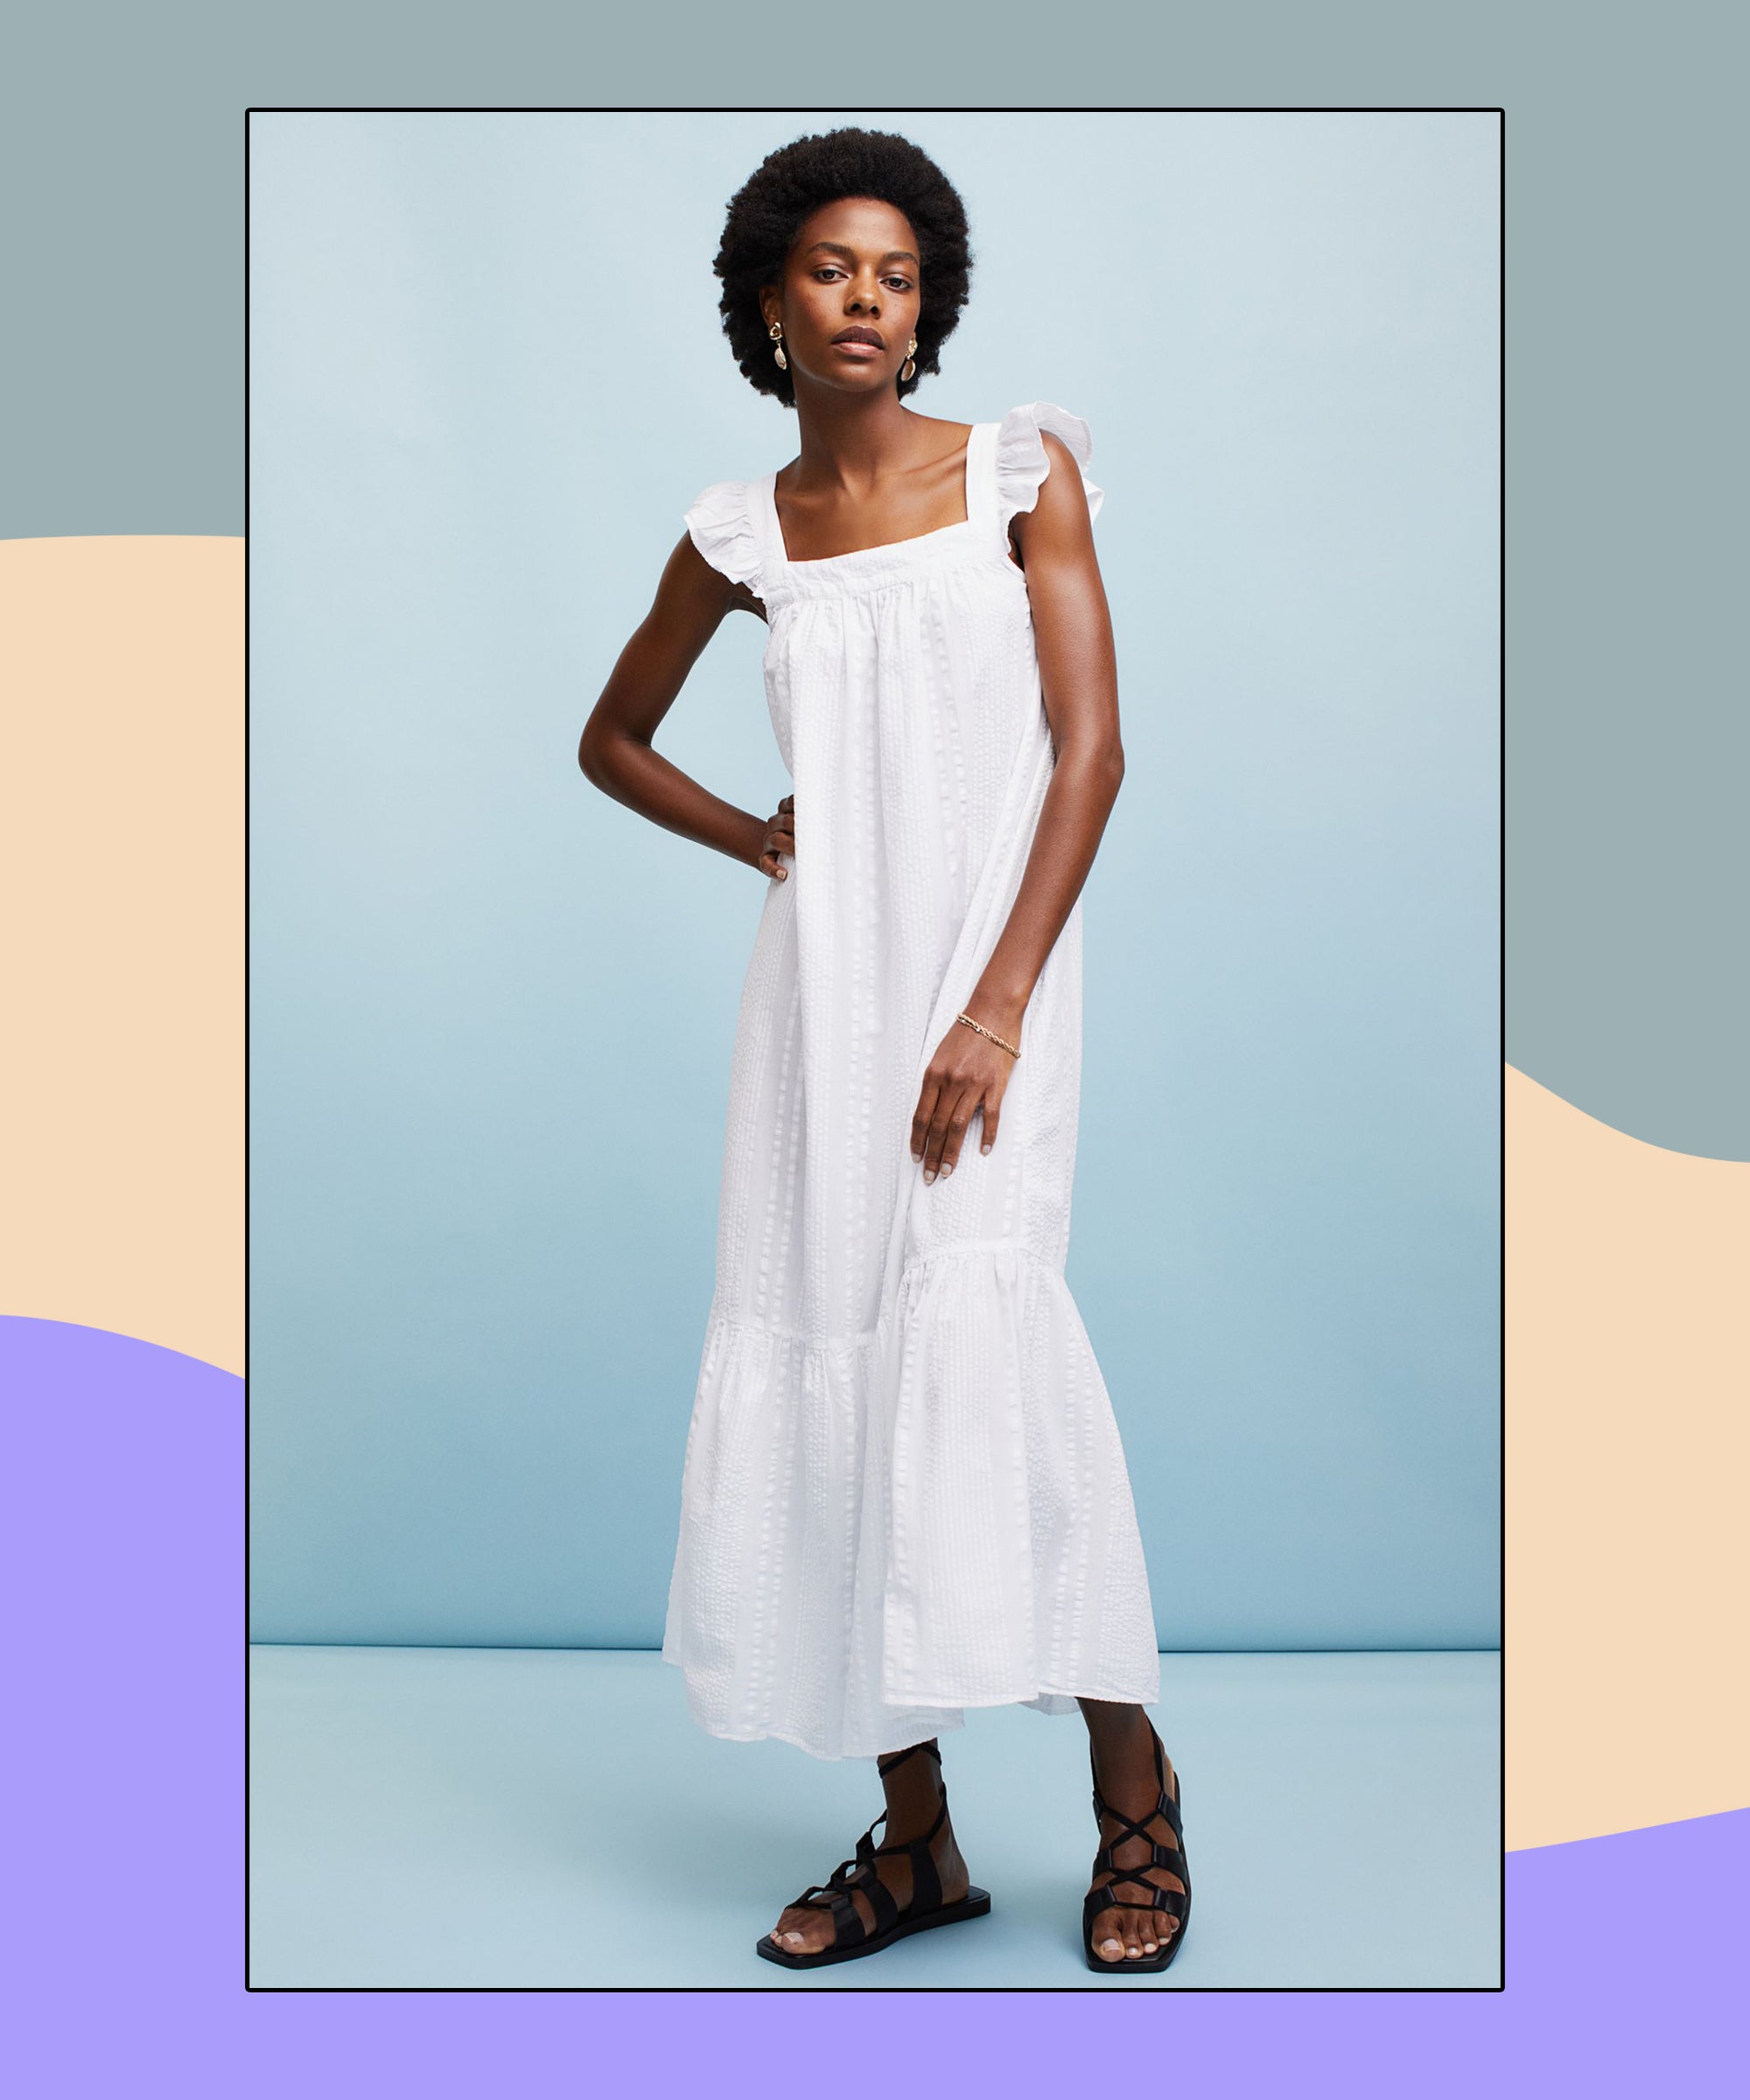 The Nap Dress Trend Best Styles To Buy ...